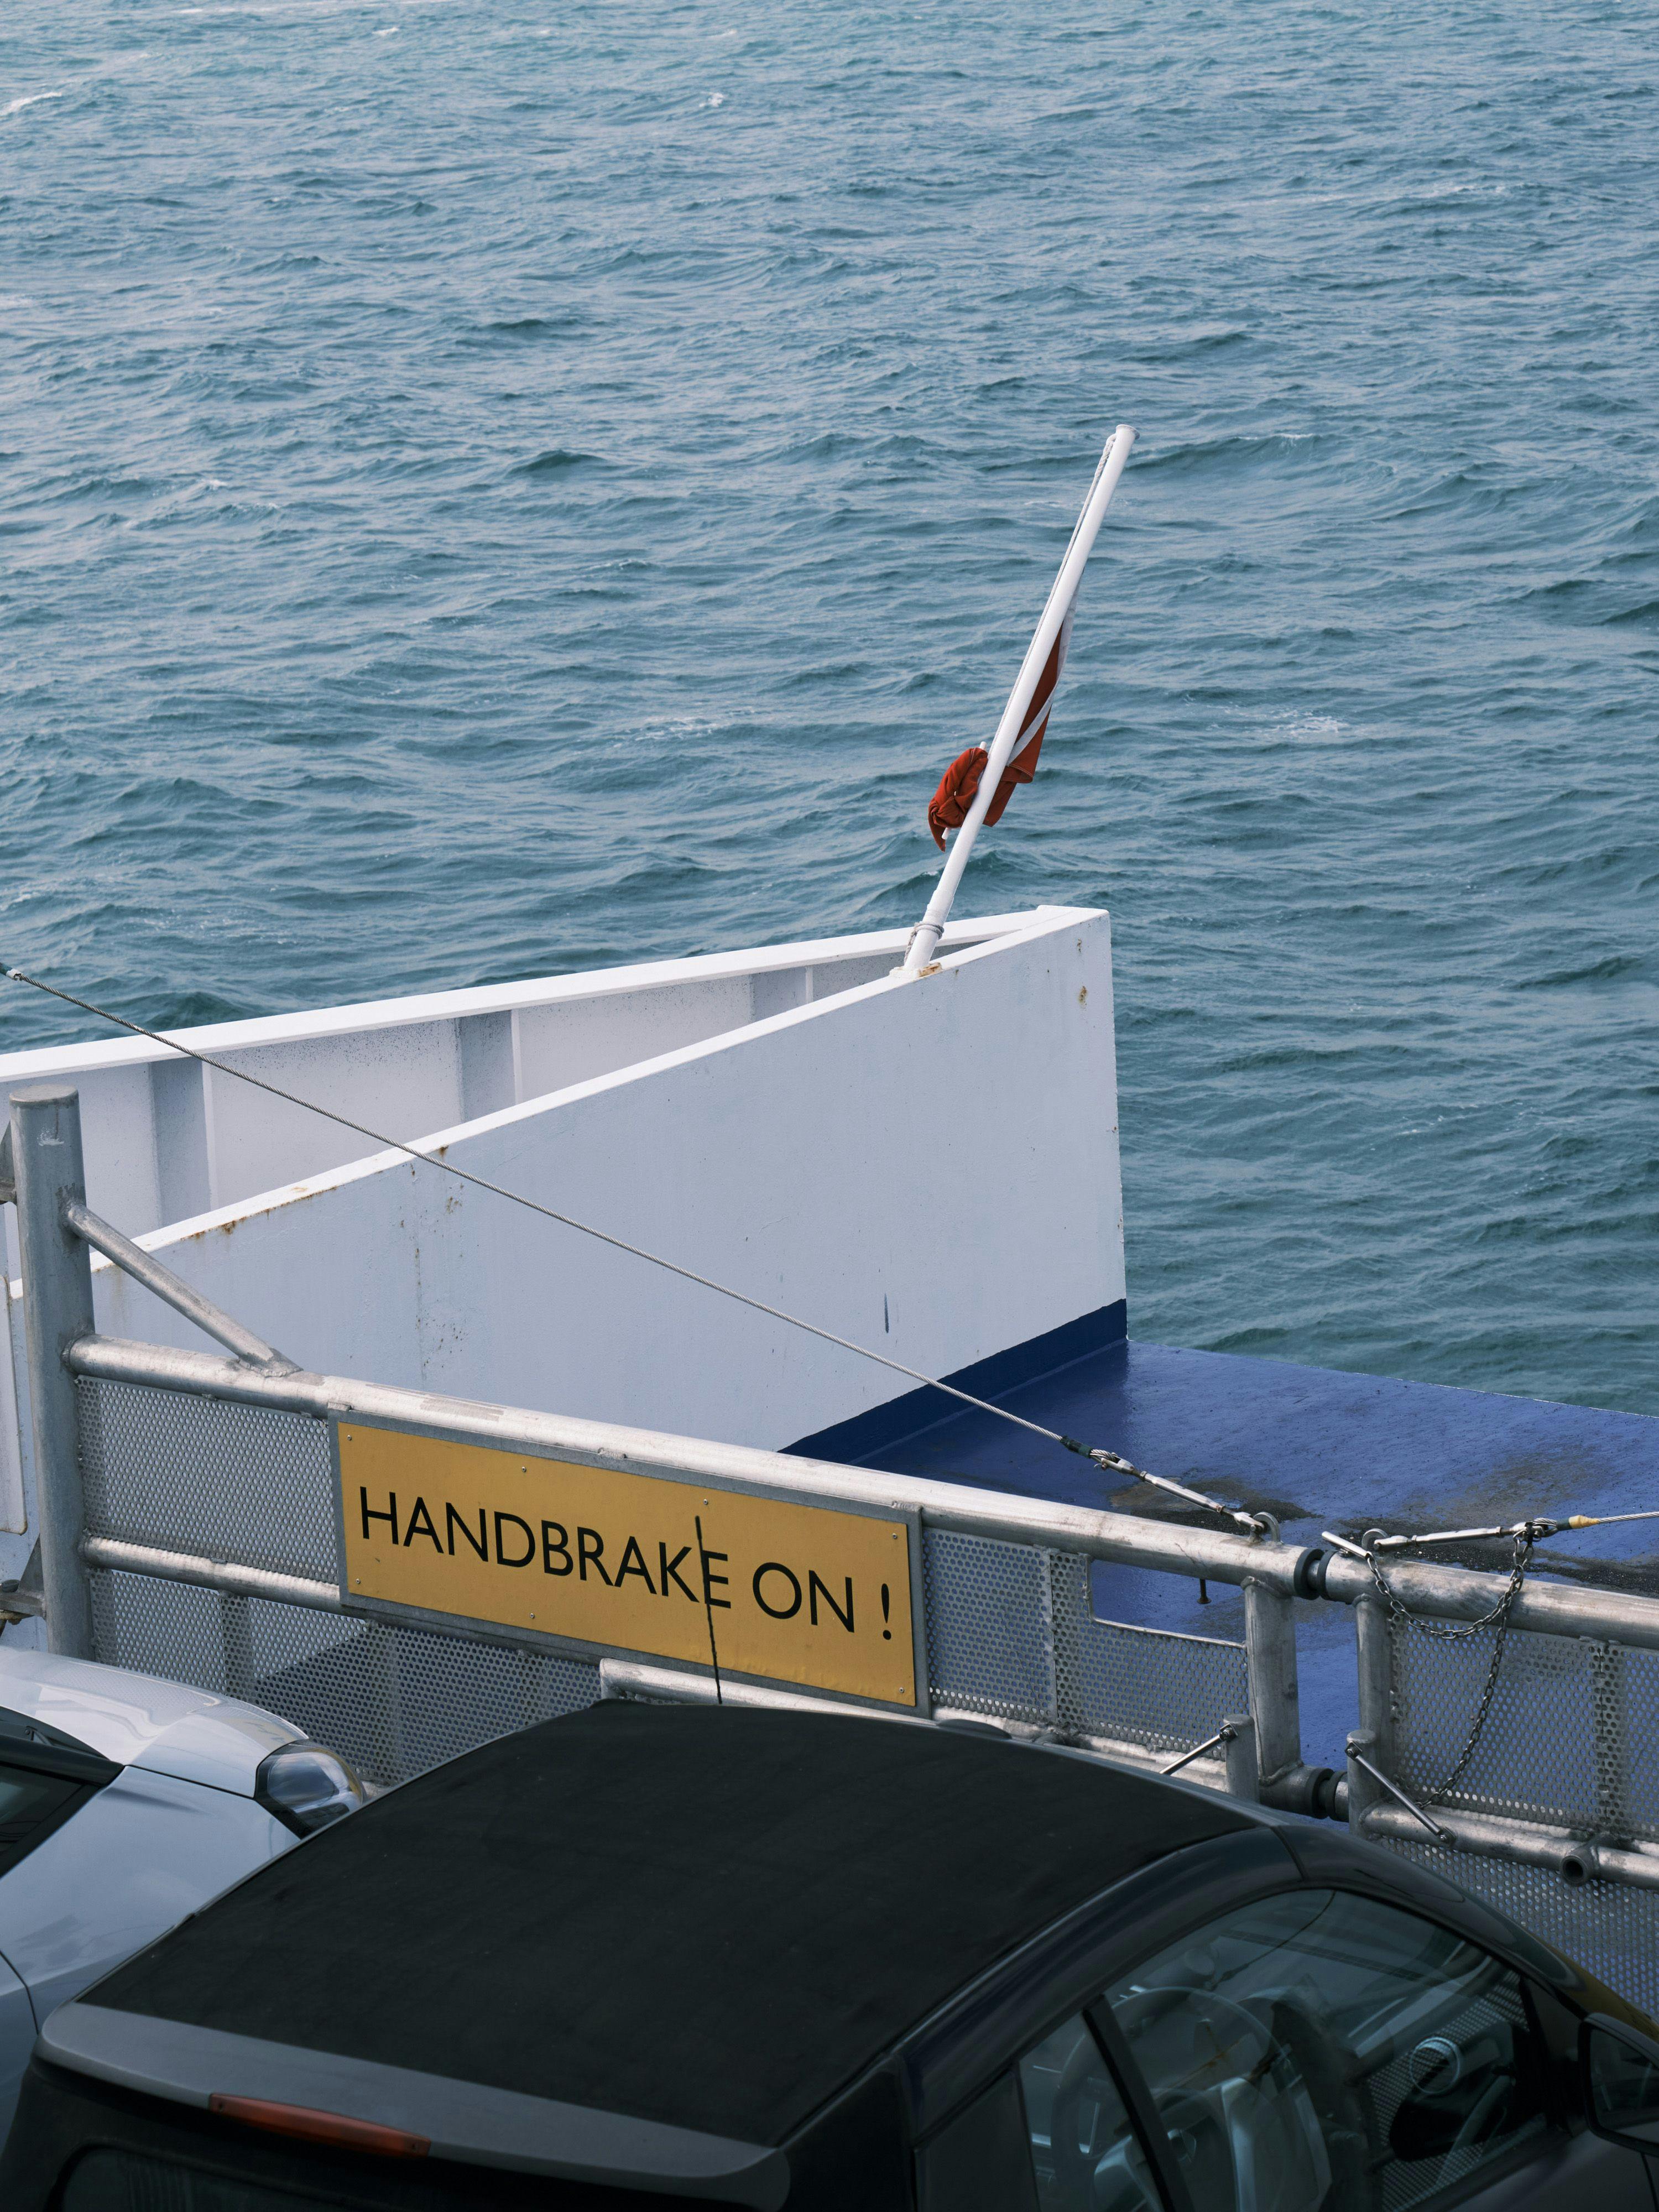 Shot of the ferry bow with a sign "handbrake on"